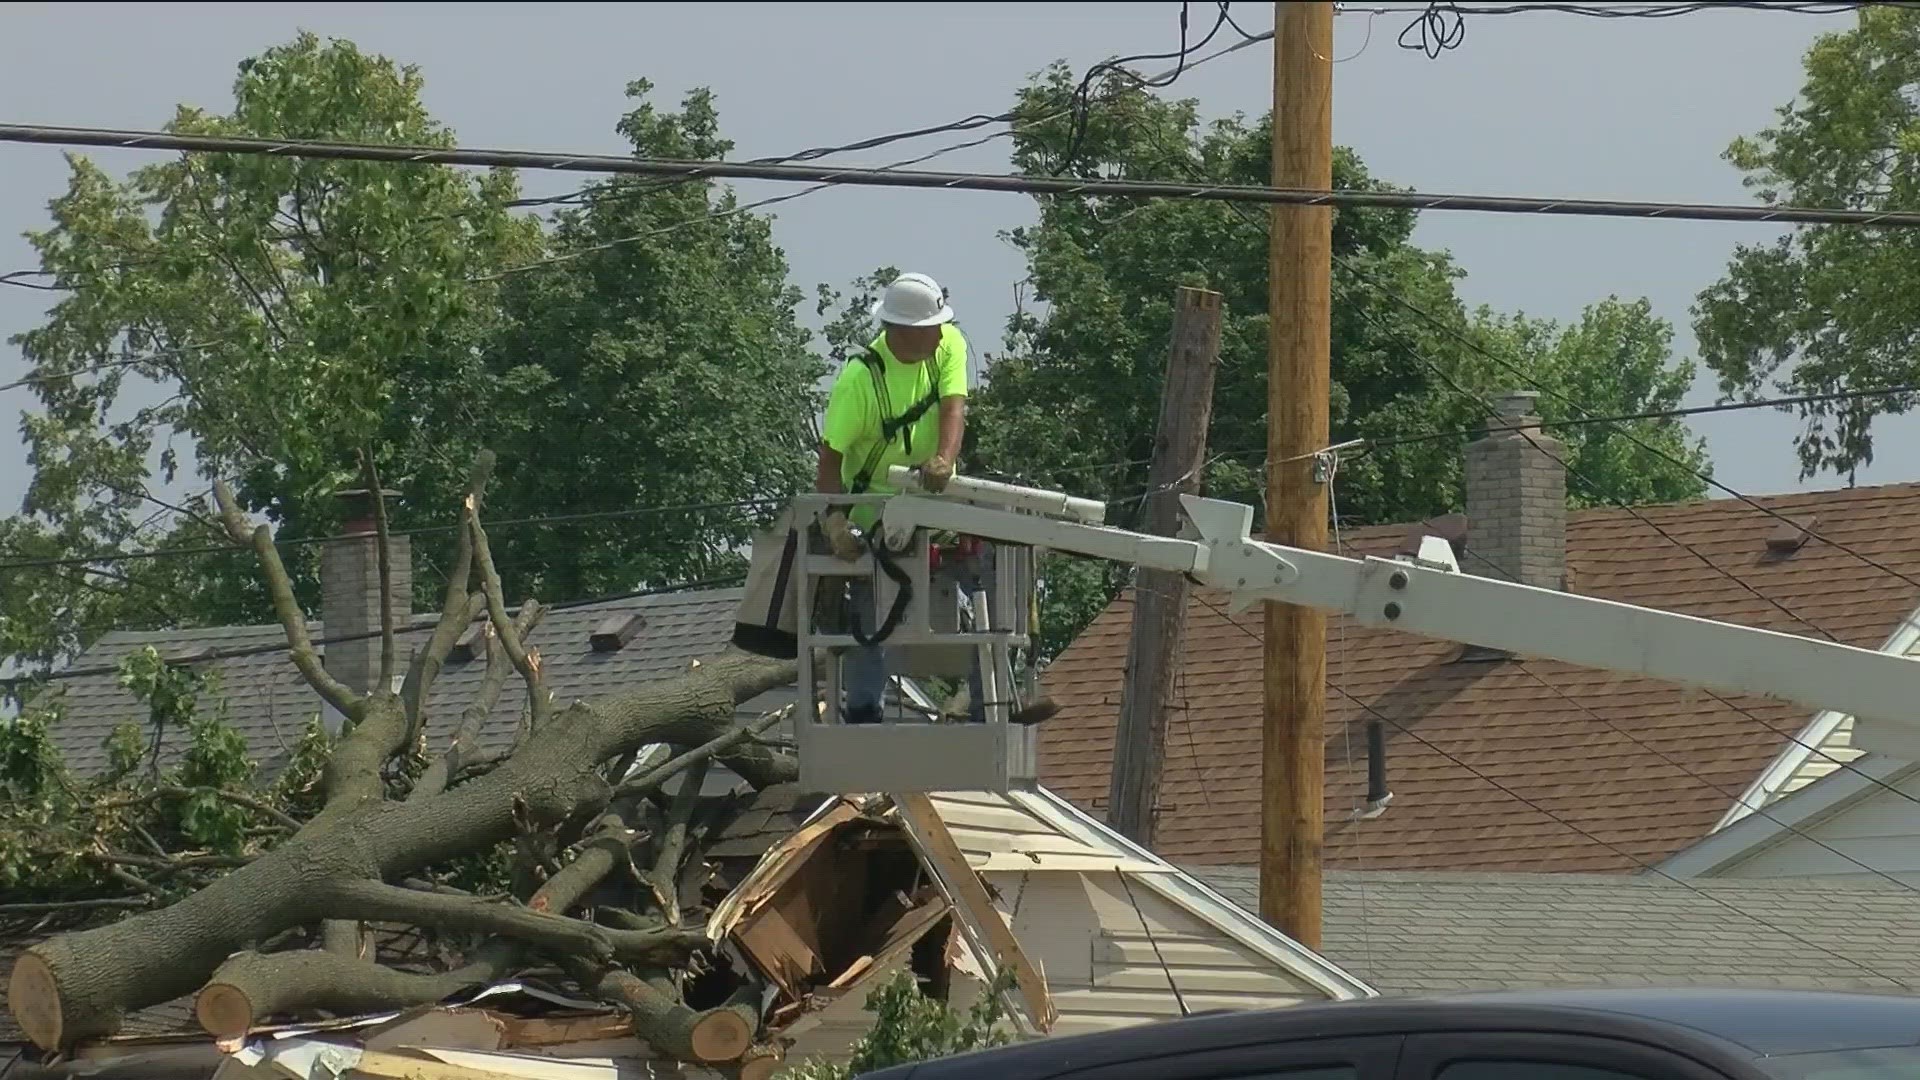 Communities across our area continue to recover after nine confirmed tornadoes hit northwest Ohio and southeast Michigan on Thursday.